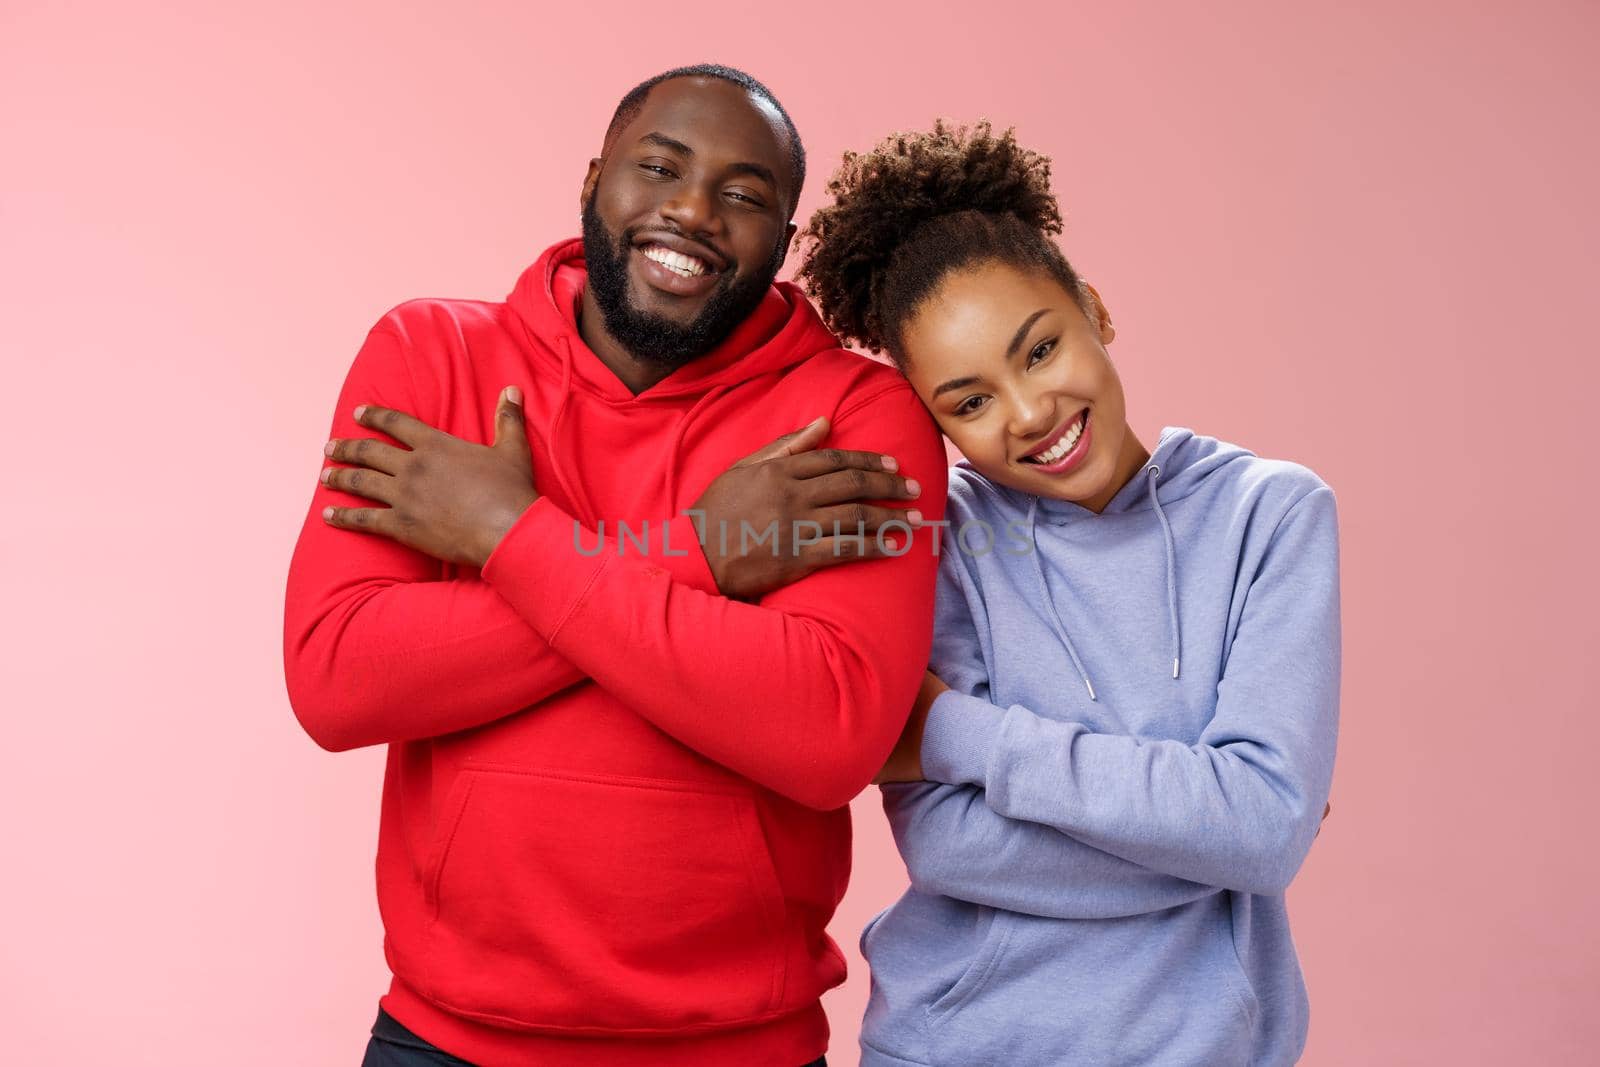 Charming happy sincere african-american family guy girl relationship embracing cross arms chest hugging each other girlfriend lean boyfriend shoulder lovely couply smiling feel love warmth.